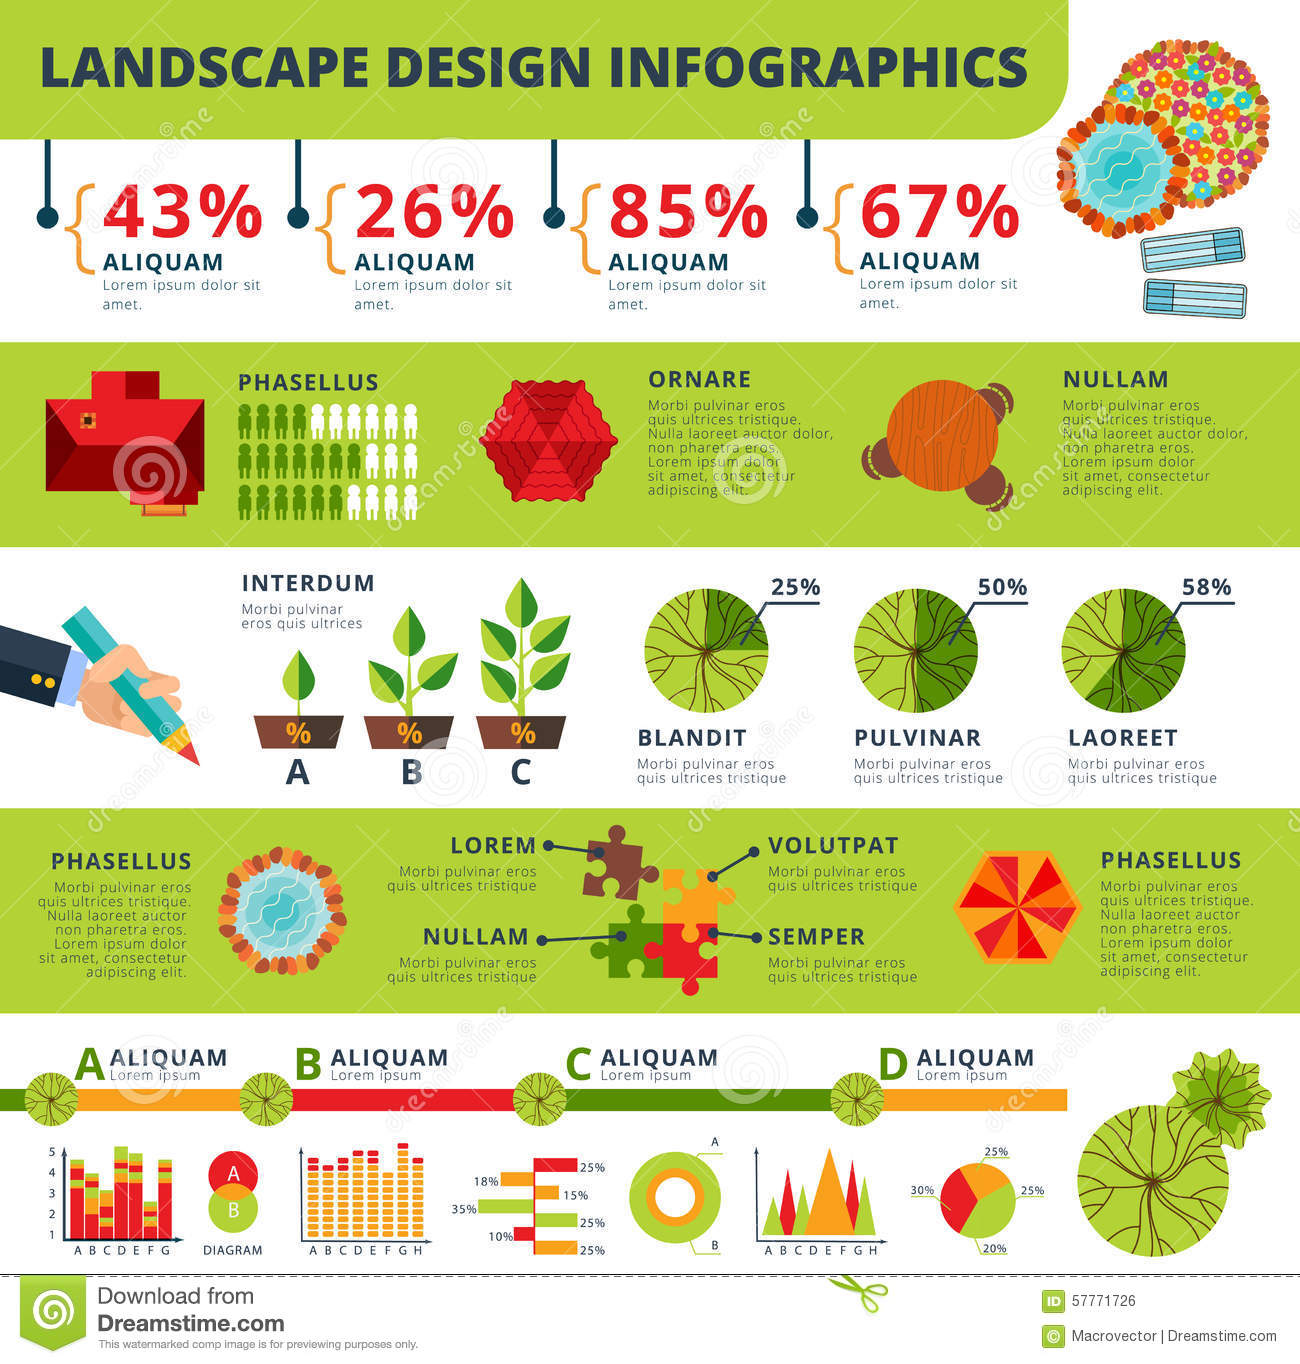 landscape format infographic - Google Search | INFOGRAPHICS | Pinterest | Infographic and ...